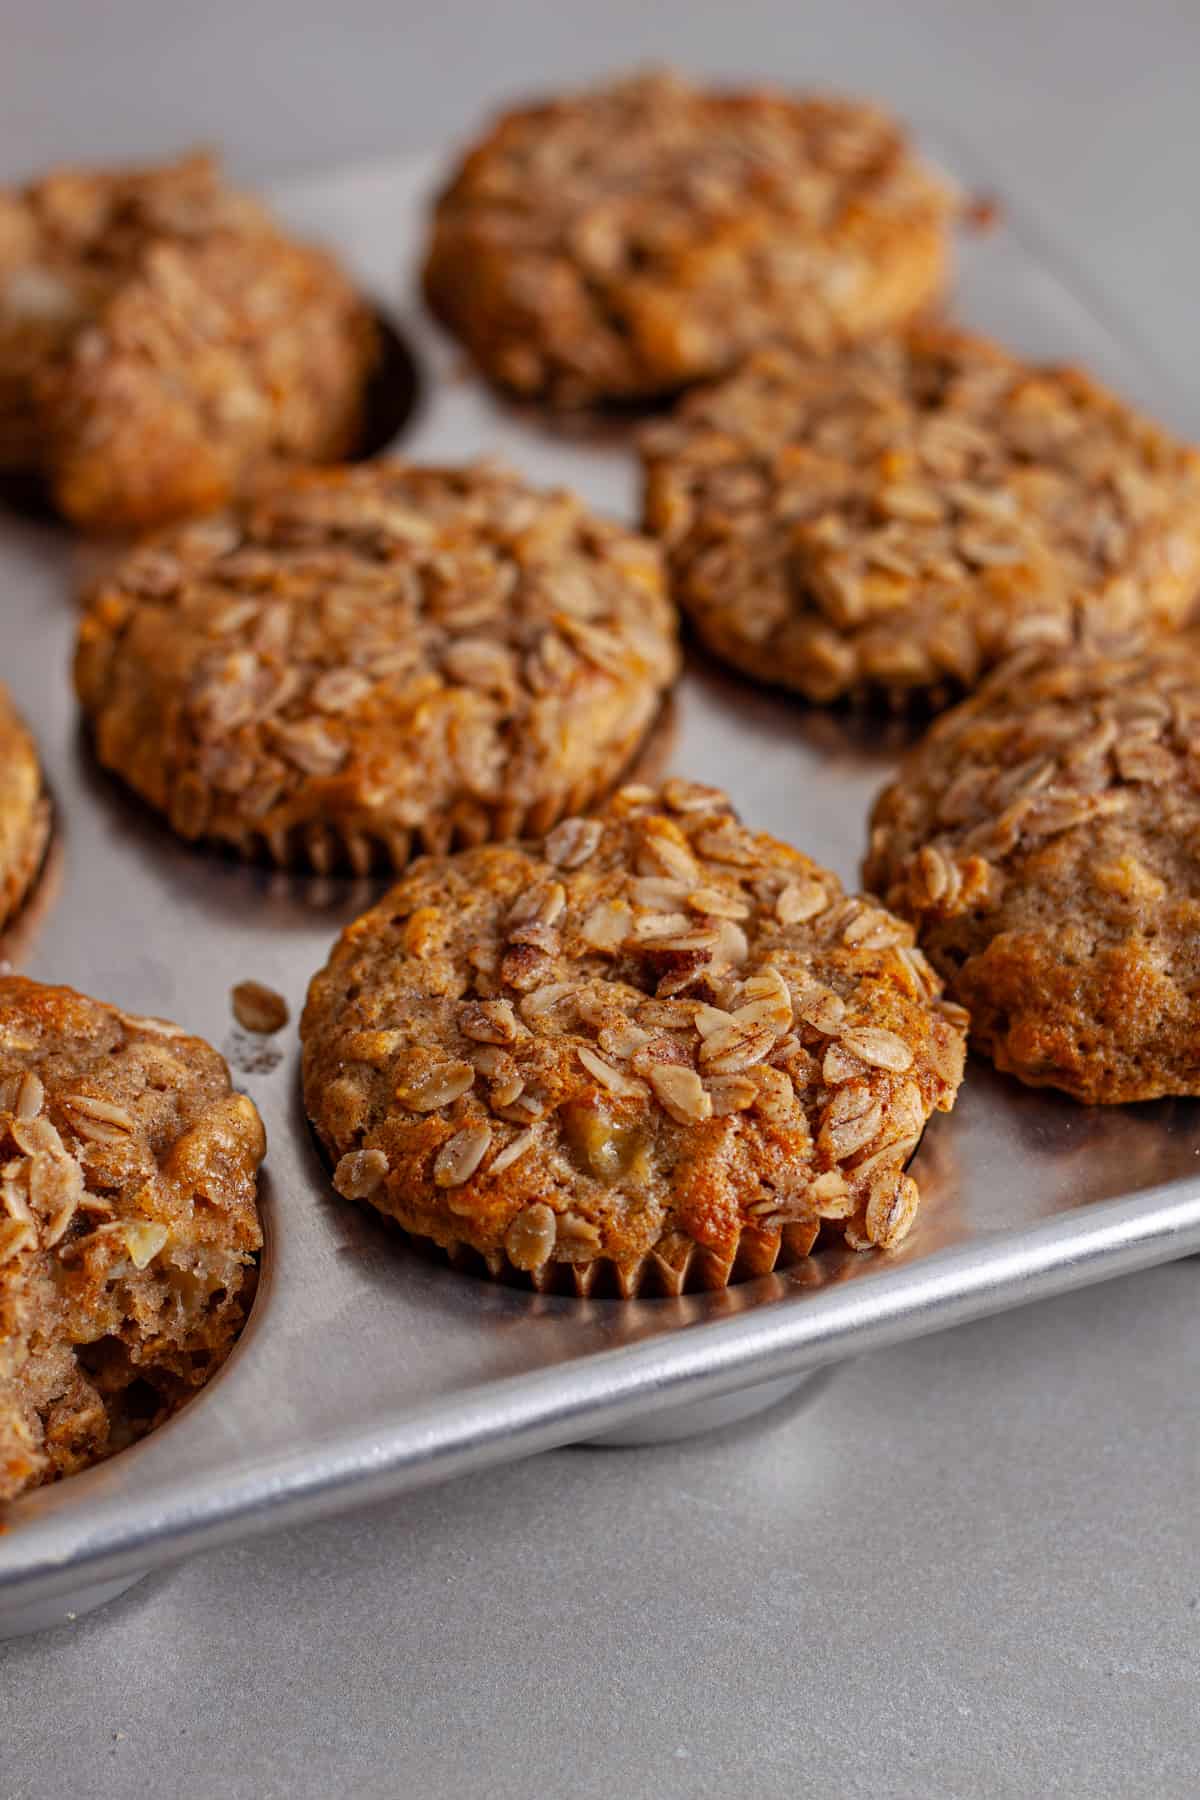 A muffin tin with banana oatmeal muffins inside topped with crunchy oats.